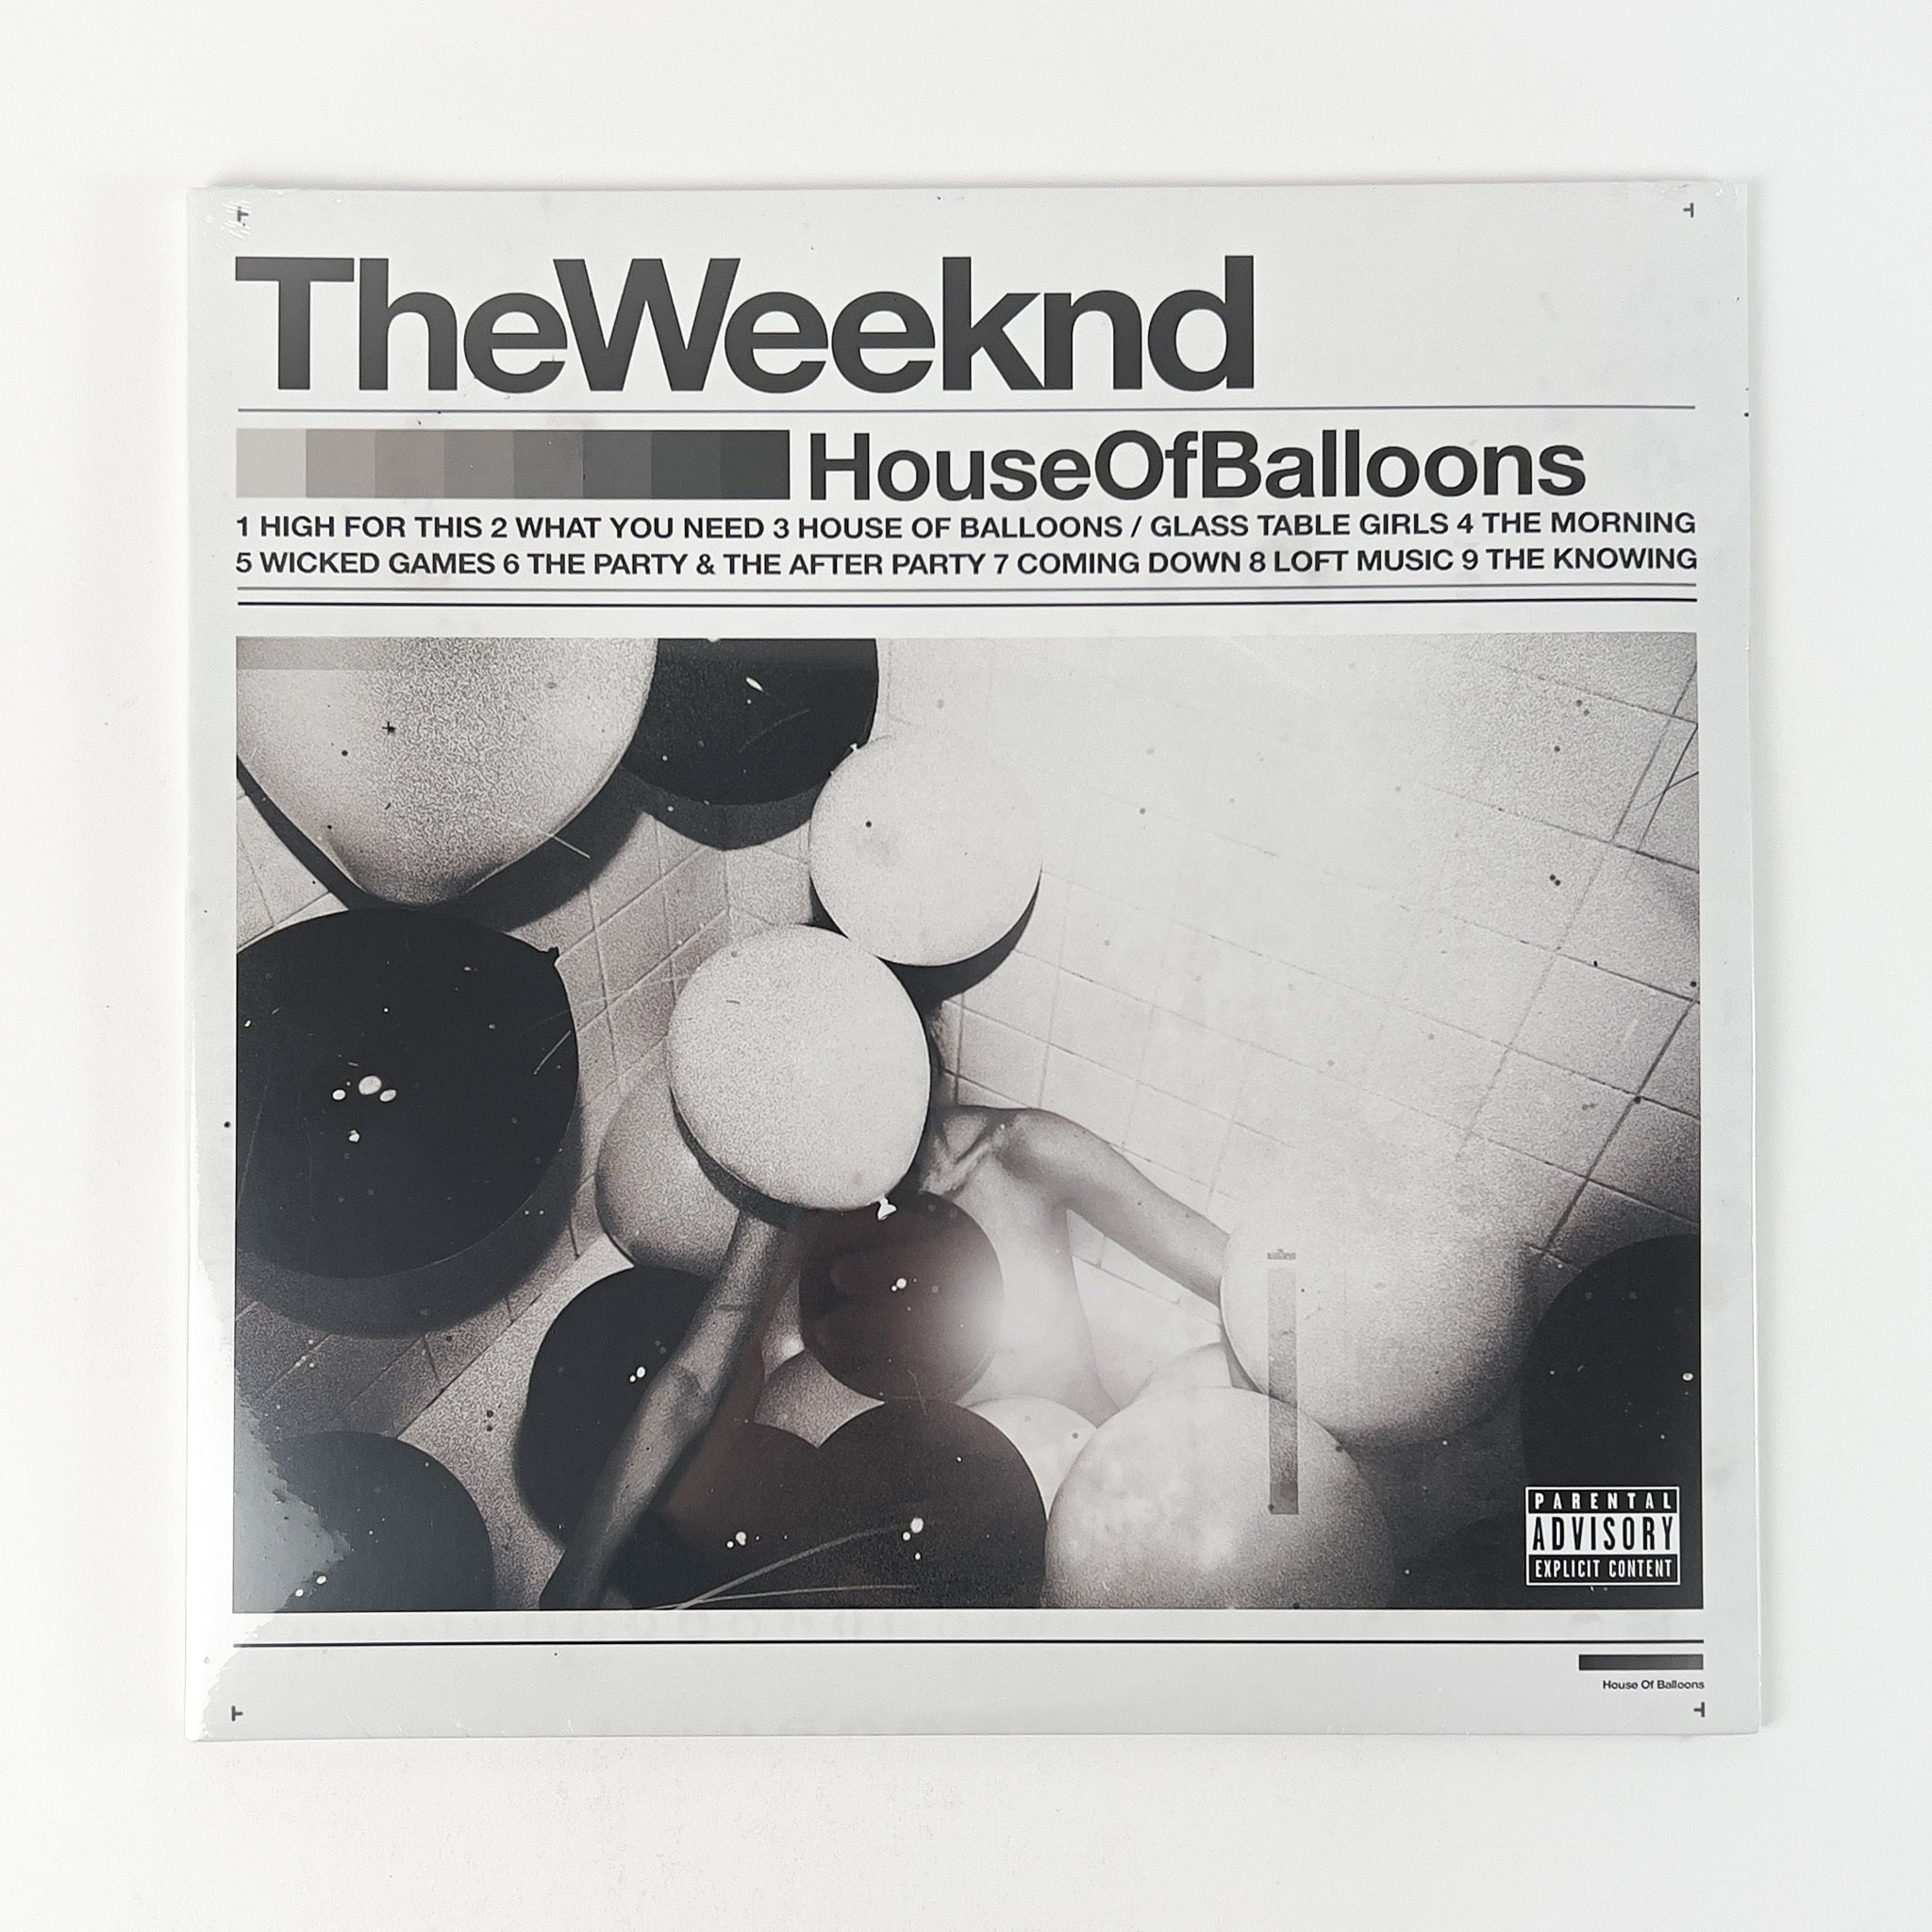 [DAMAGED] The Weeknd - House of Balloons (10th Anniversary) [2LP] [LIMIT 1 PER CUSTOMER]